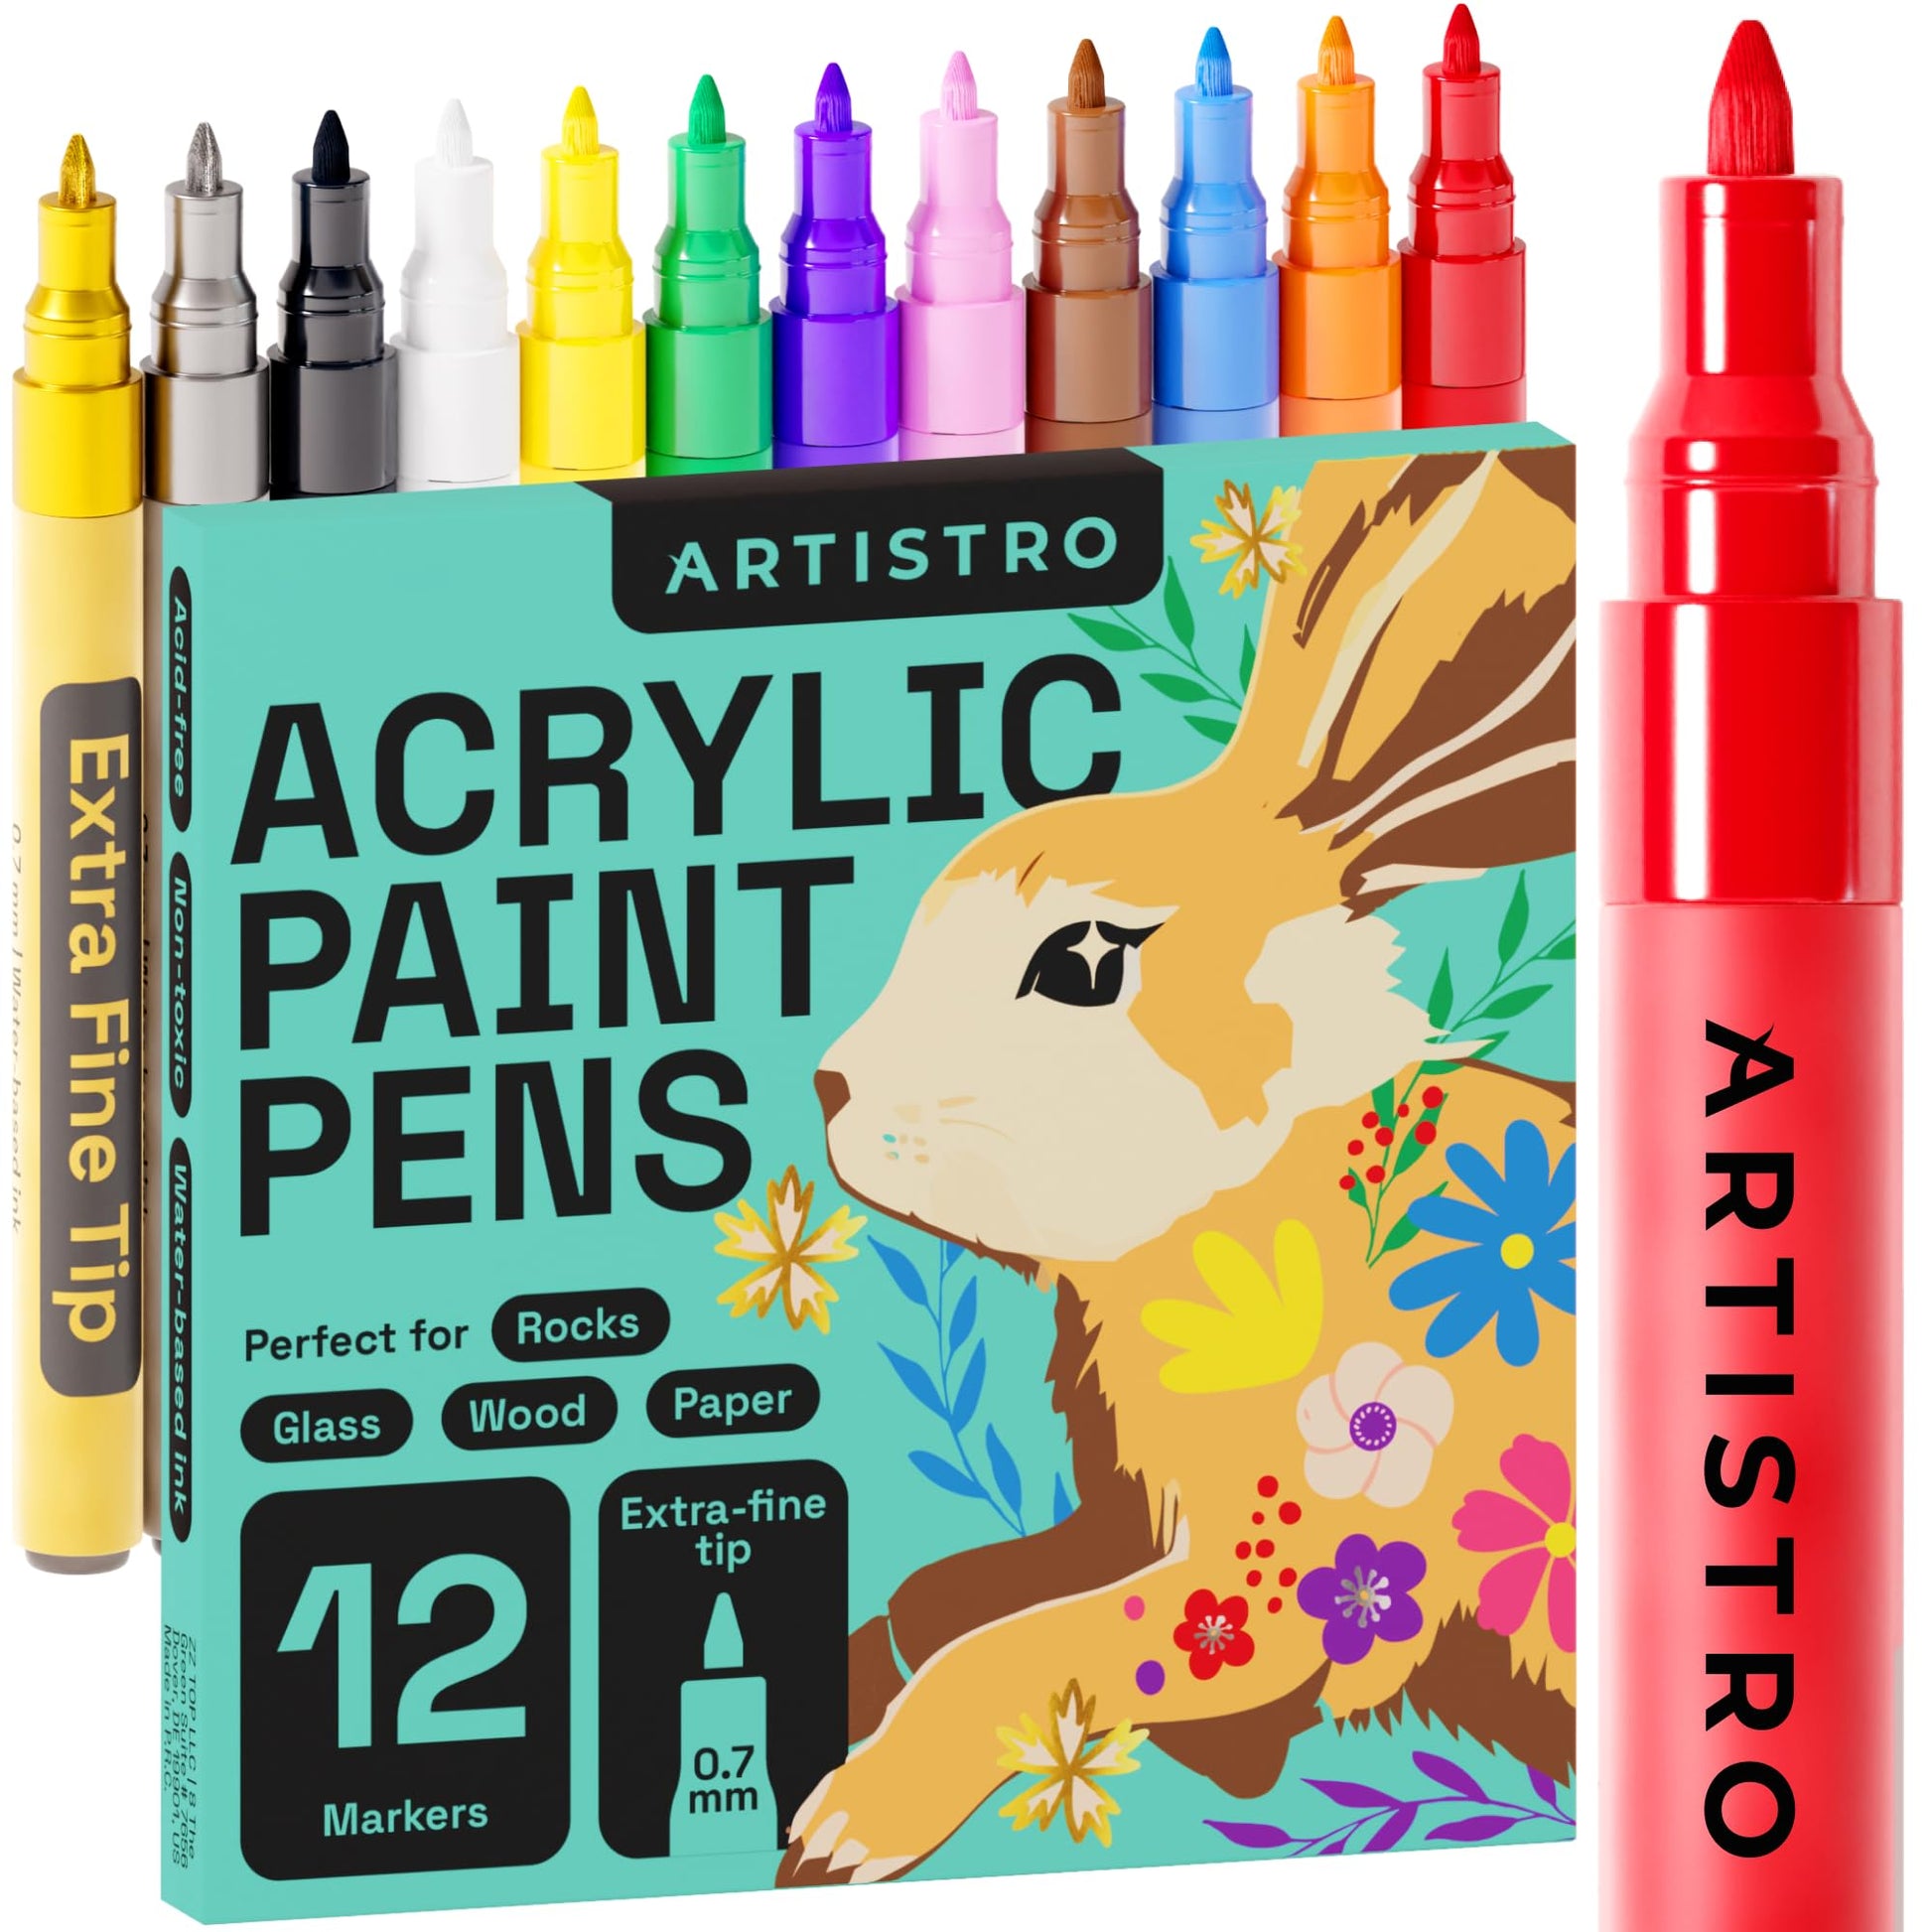 60 ARTISTRO Markers for Art | 30 Acrylic Extra Fine Tip Paint Pens + 30 Acrylic Medium Tip Paint Pens for Rock, Wood, Glass, Ceramic, Metal Painting